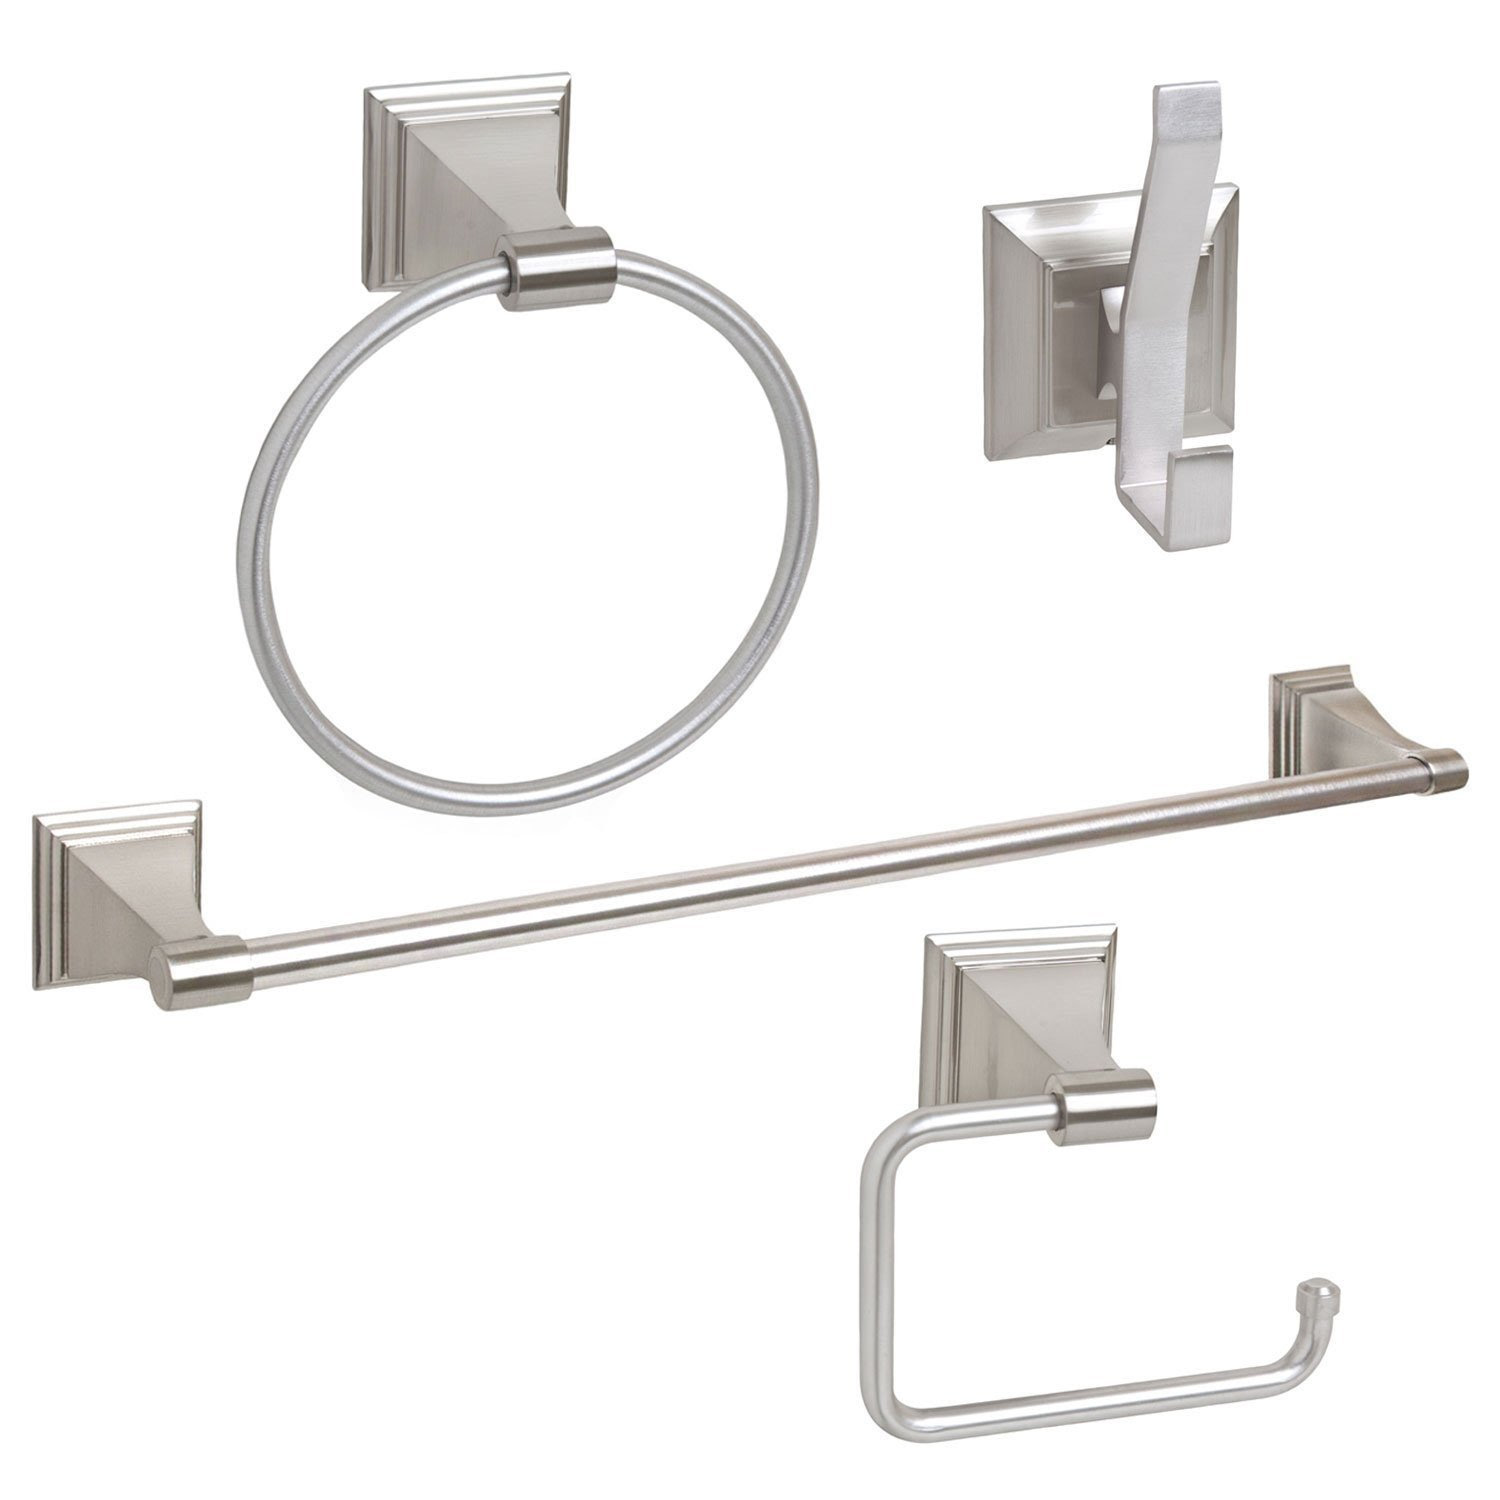 Brushed Nickel Bathroom Accessories Sets Cool Ideas for Home